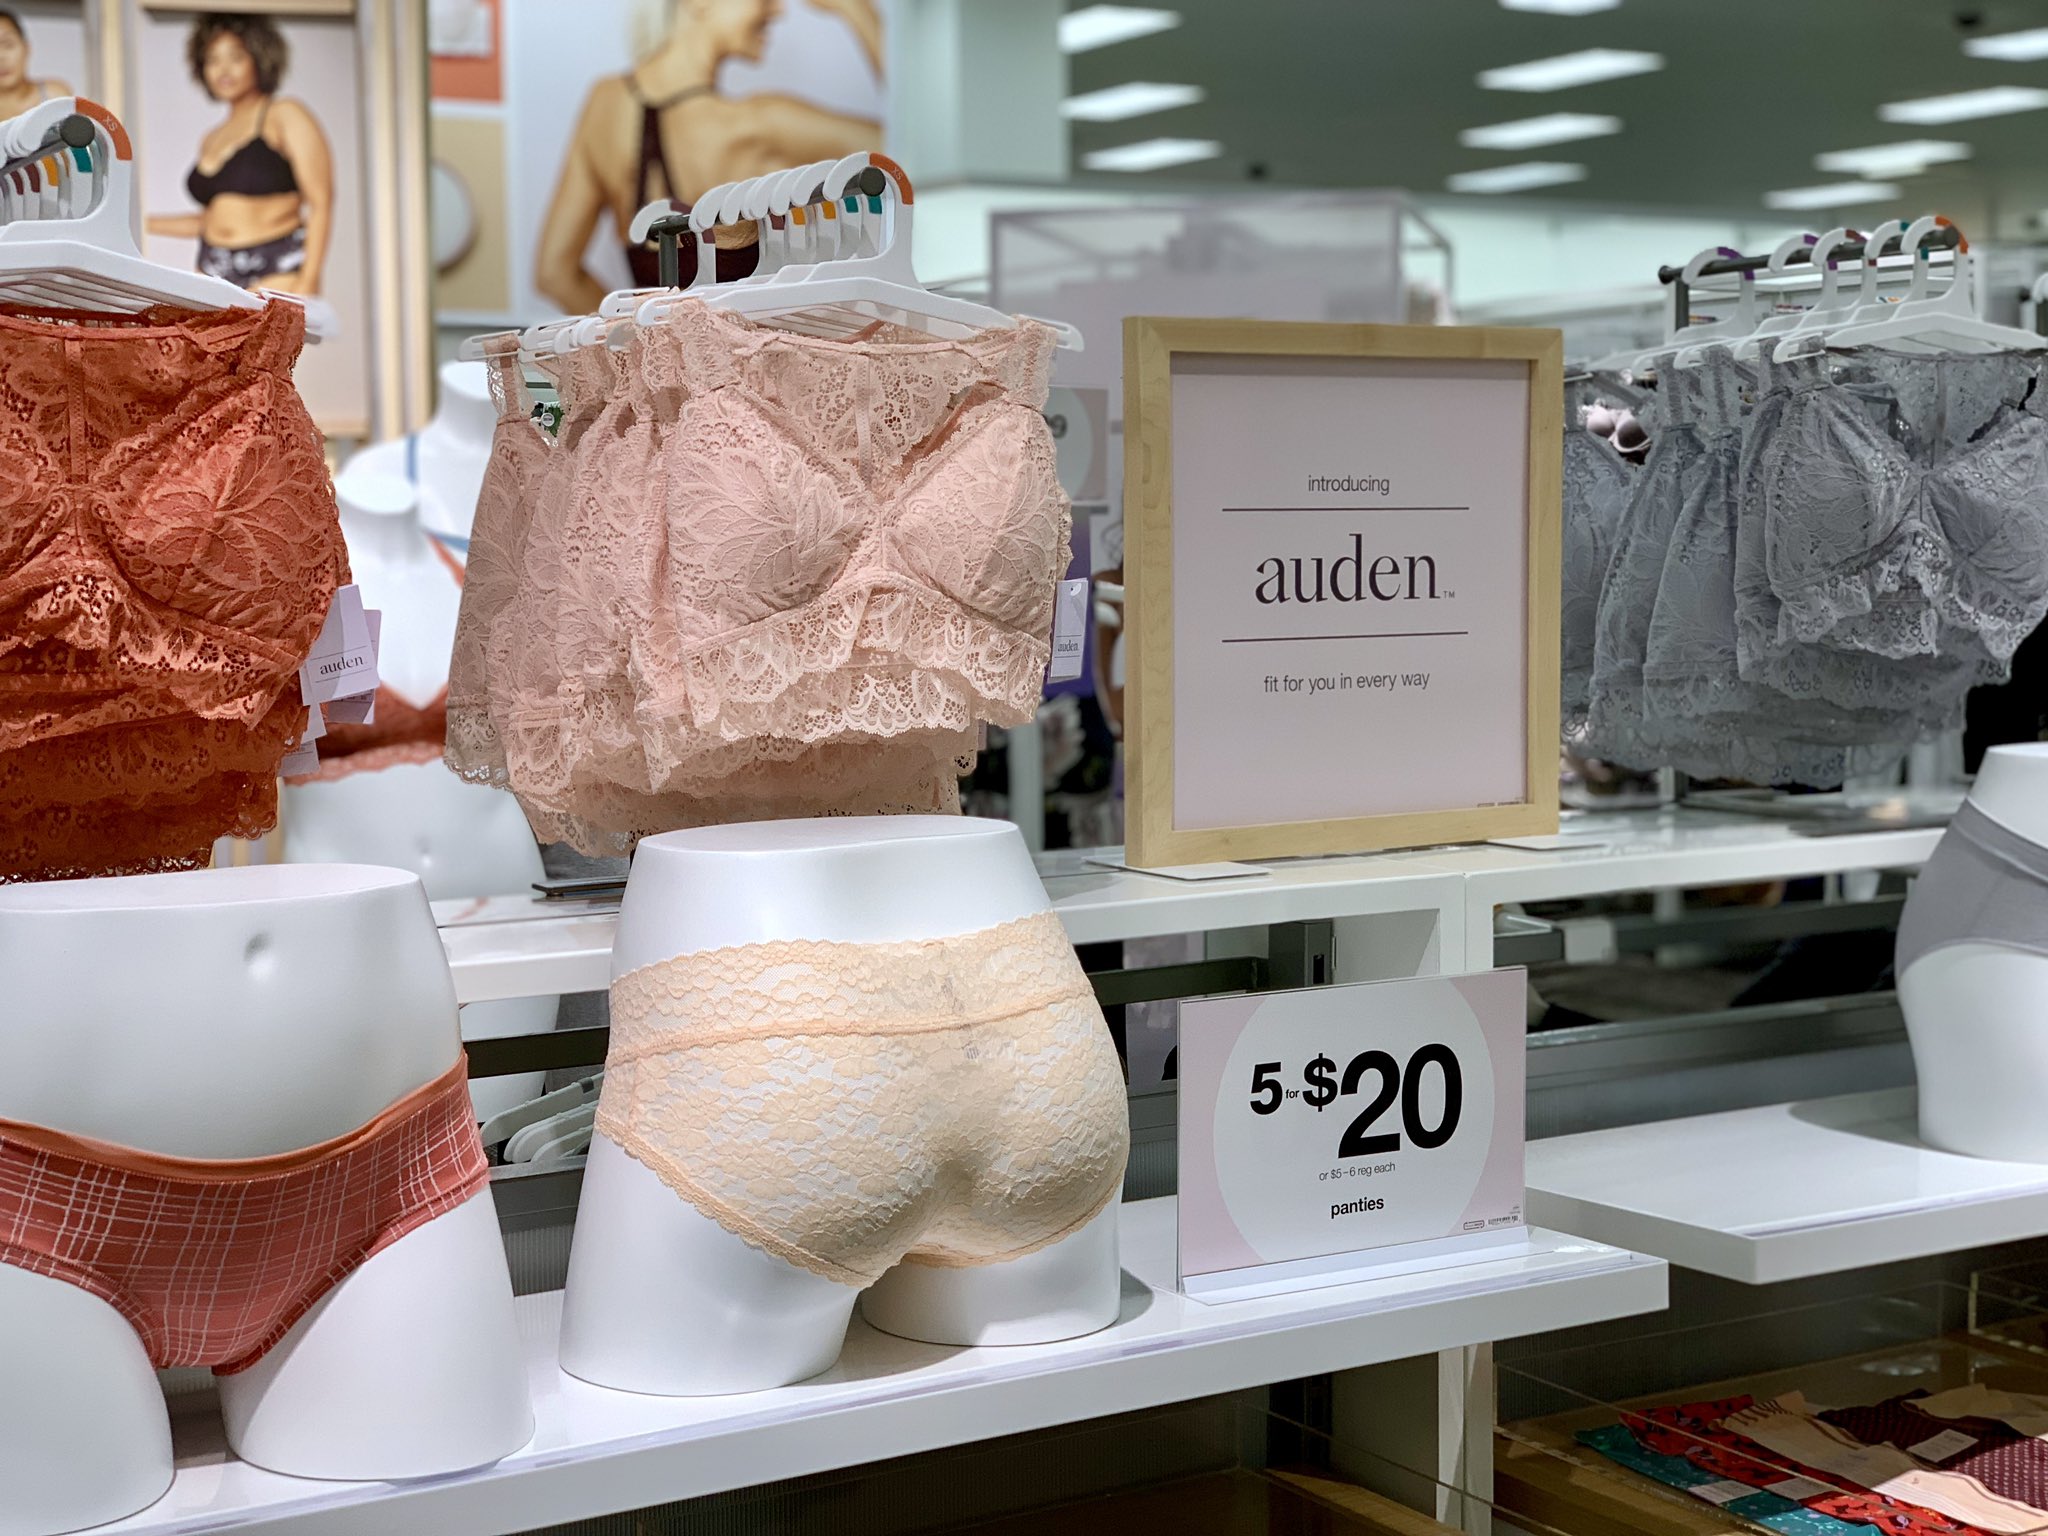 Jonathan Glatfelter on X: Presenting Auden, the new intimates brand for  women of all shapes and sizes! 🙋🏼‍♀️ #Target #T1375 #flagship #Auden  #merchandising #styling @Adam_Reiter @JenieBrisson @MurrayWWilliams  @ETLsamanthajo @LileeRichins